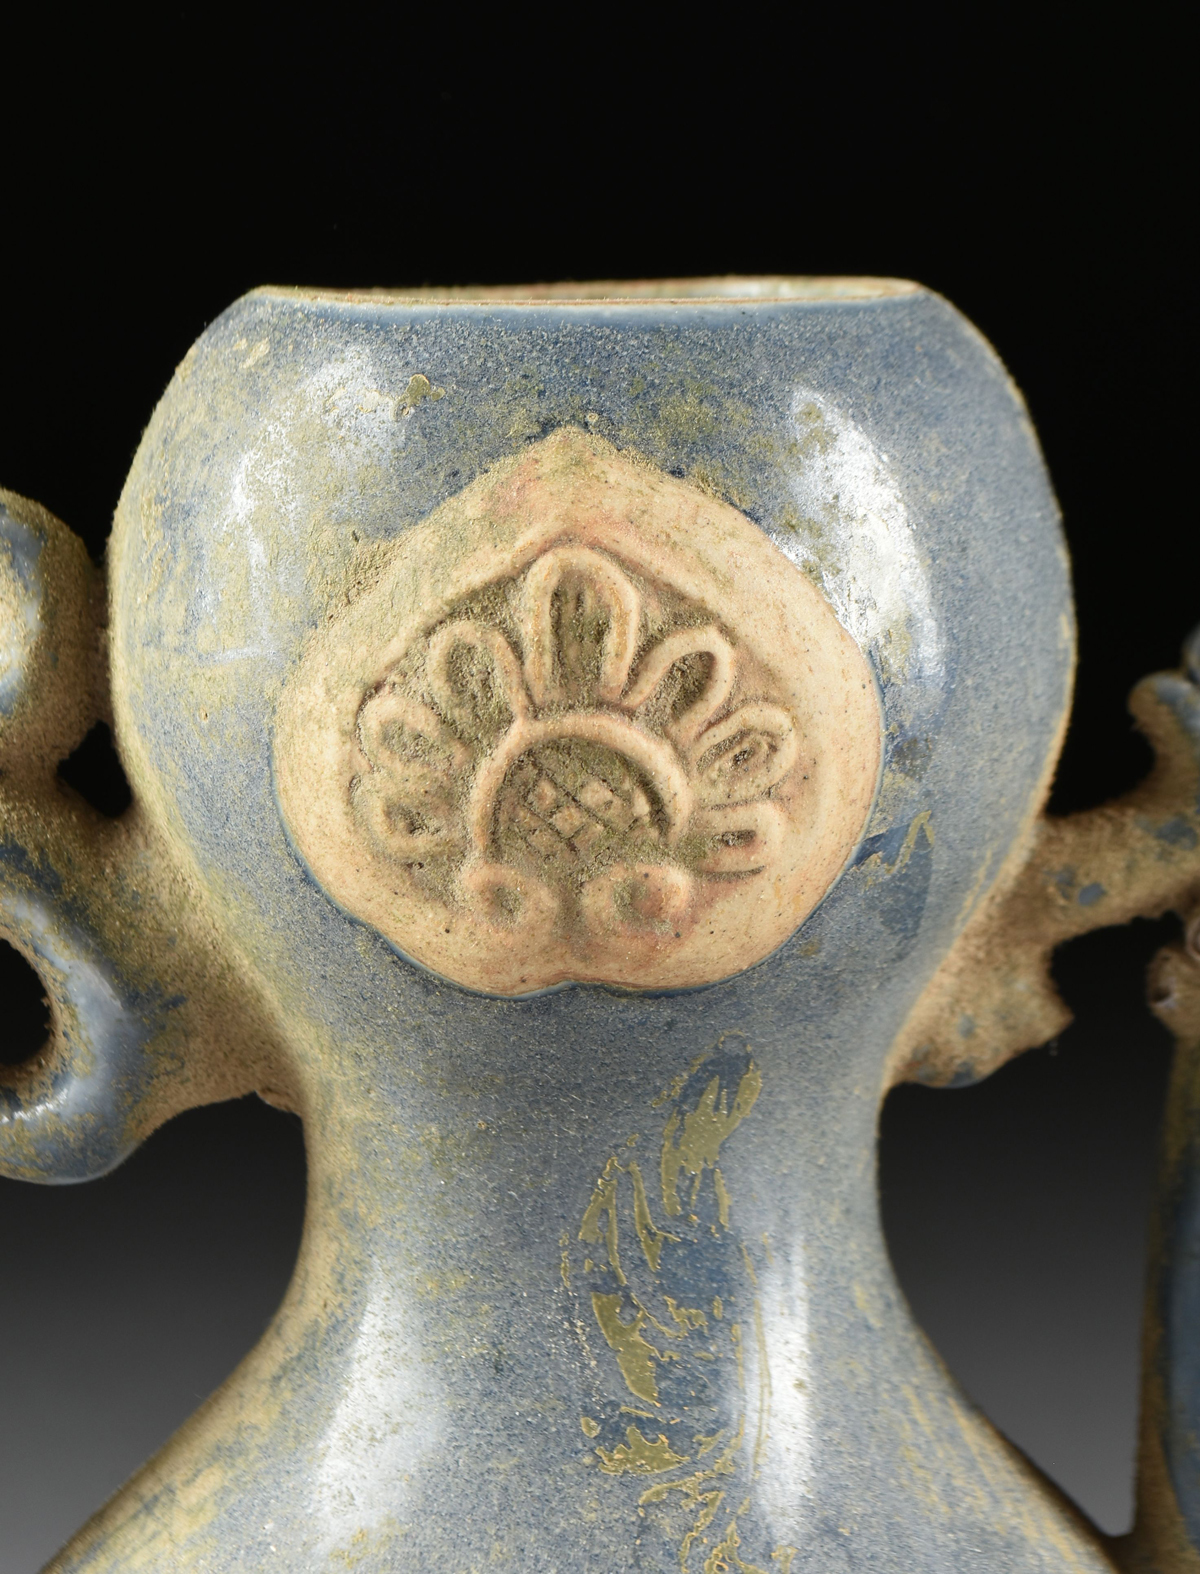 A VIETNAMESE/ANNAMESE BLUE GLAZED DOUBLE GOURD PORCELAIN EWER, SHIPWRECK ARTIFACT, 15TH/16TH - Image 9 of 11